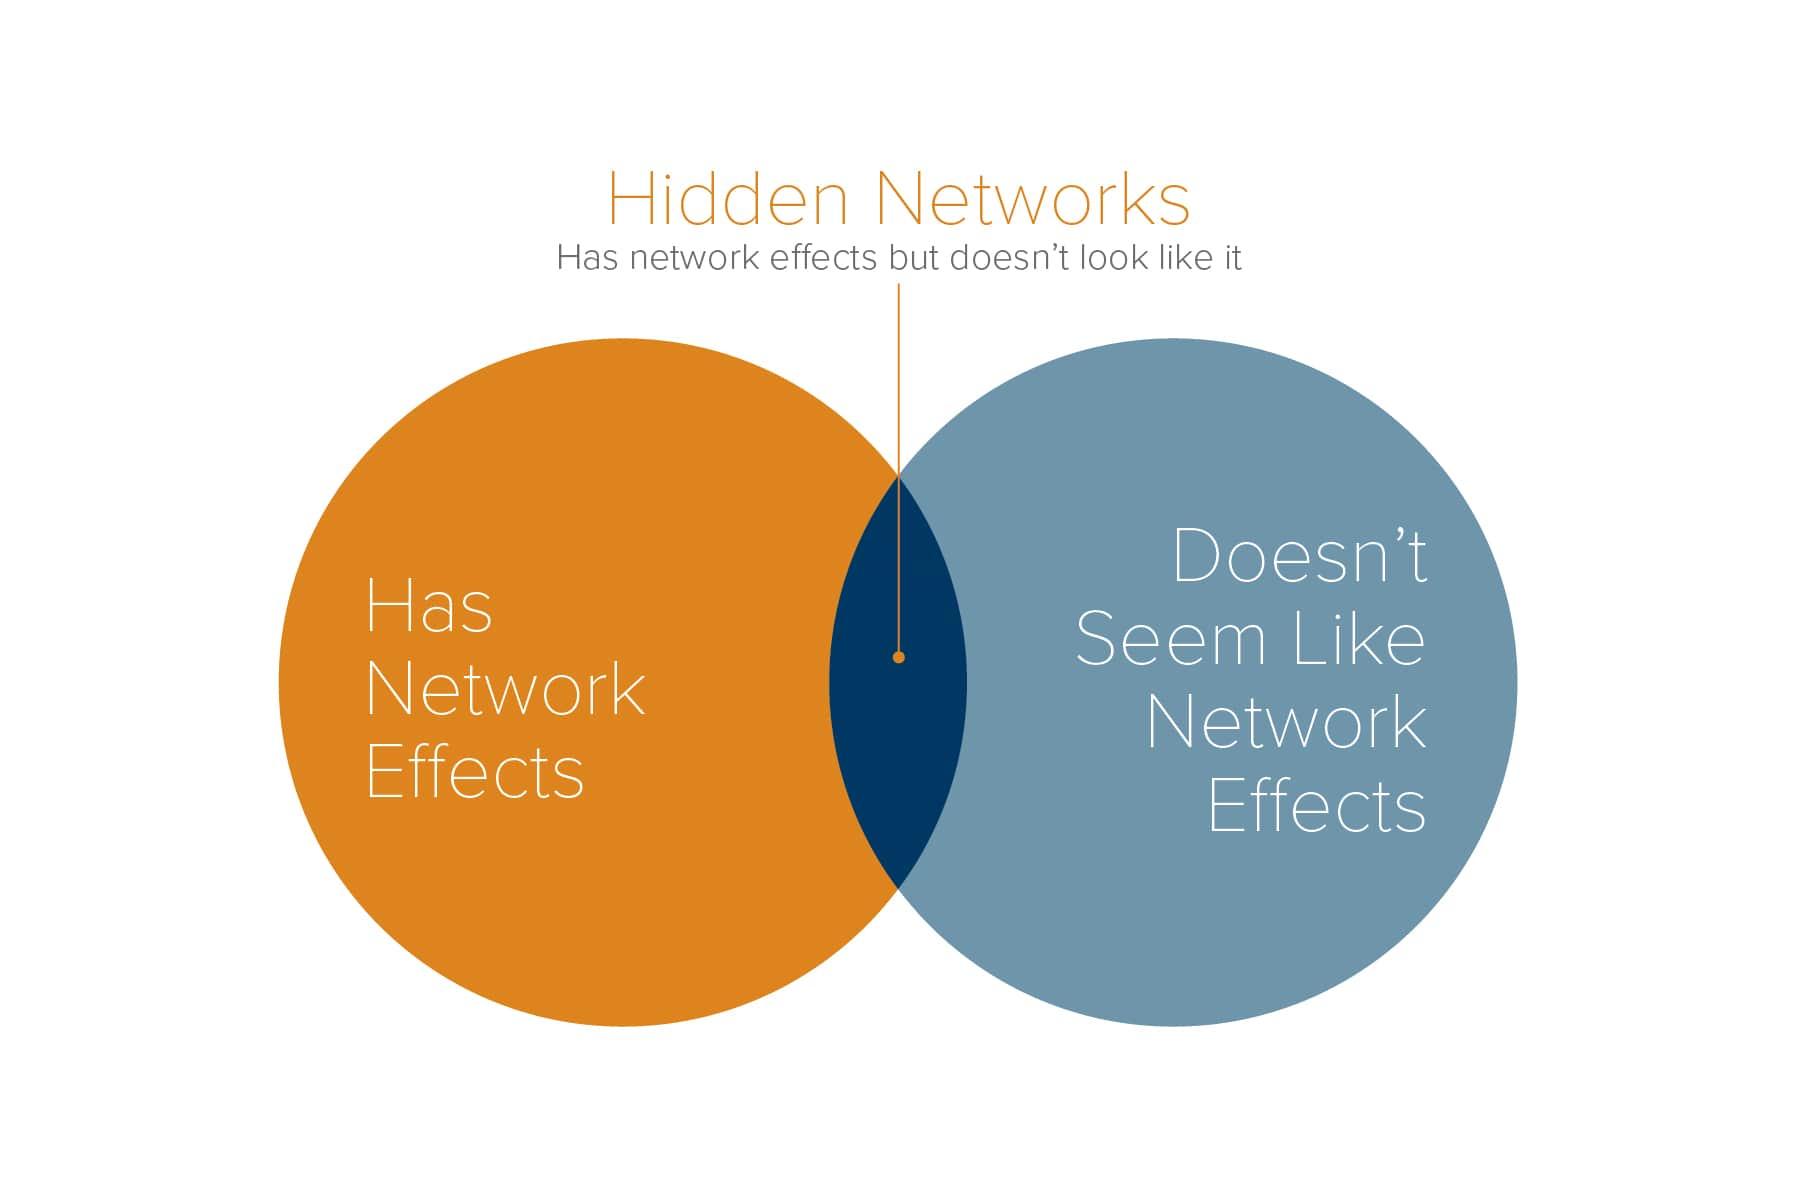 Source: Hidden Networks: Network Effects That Don’t Look Like Network Effects